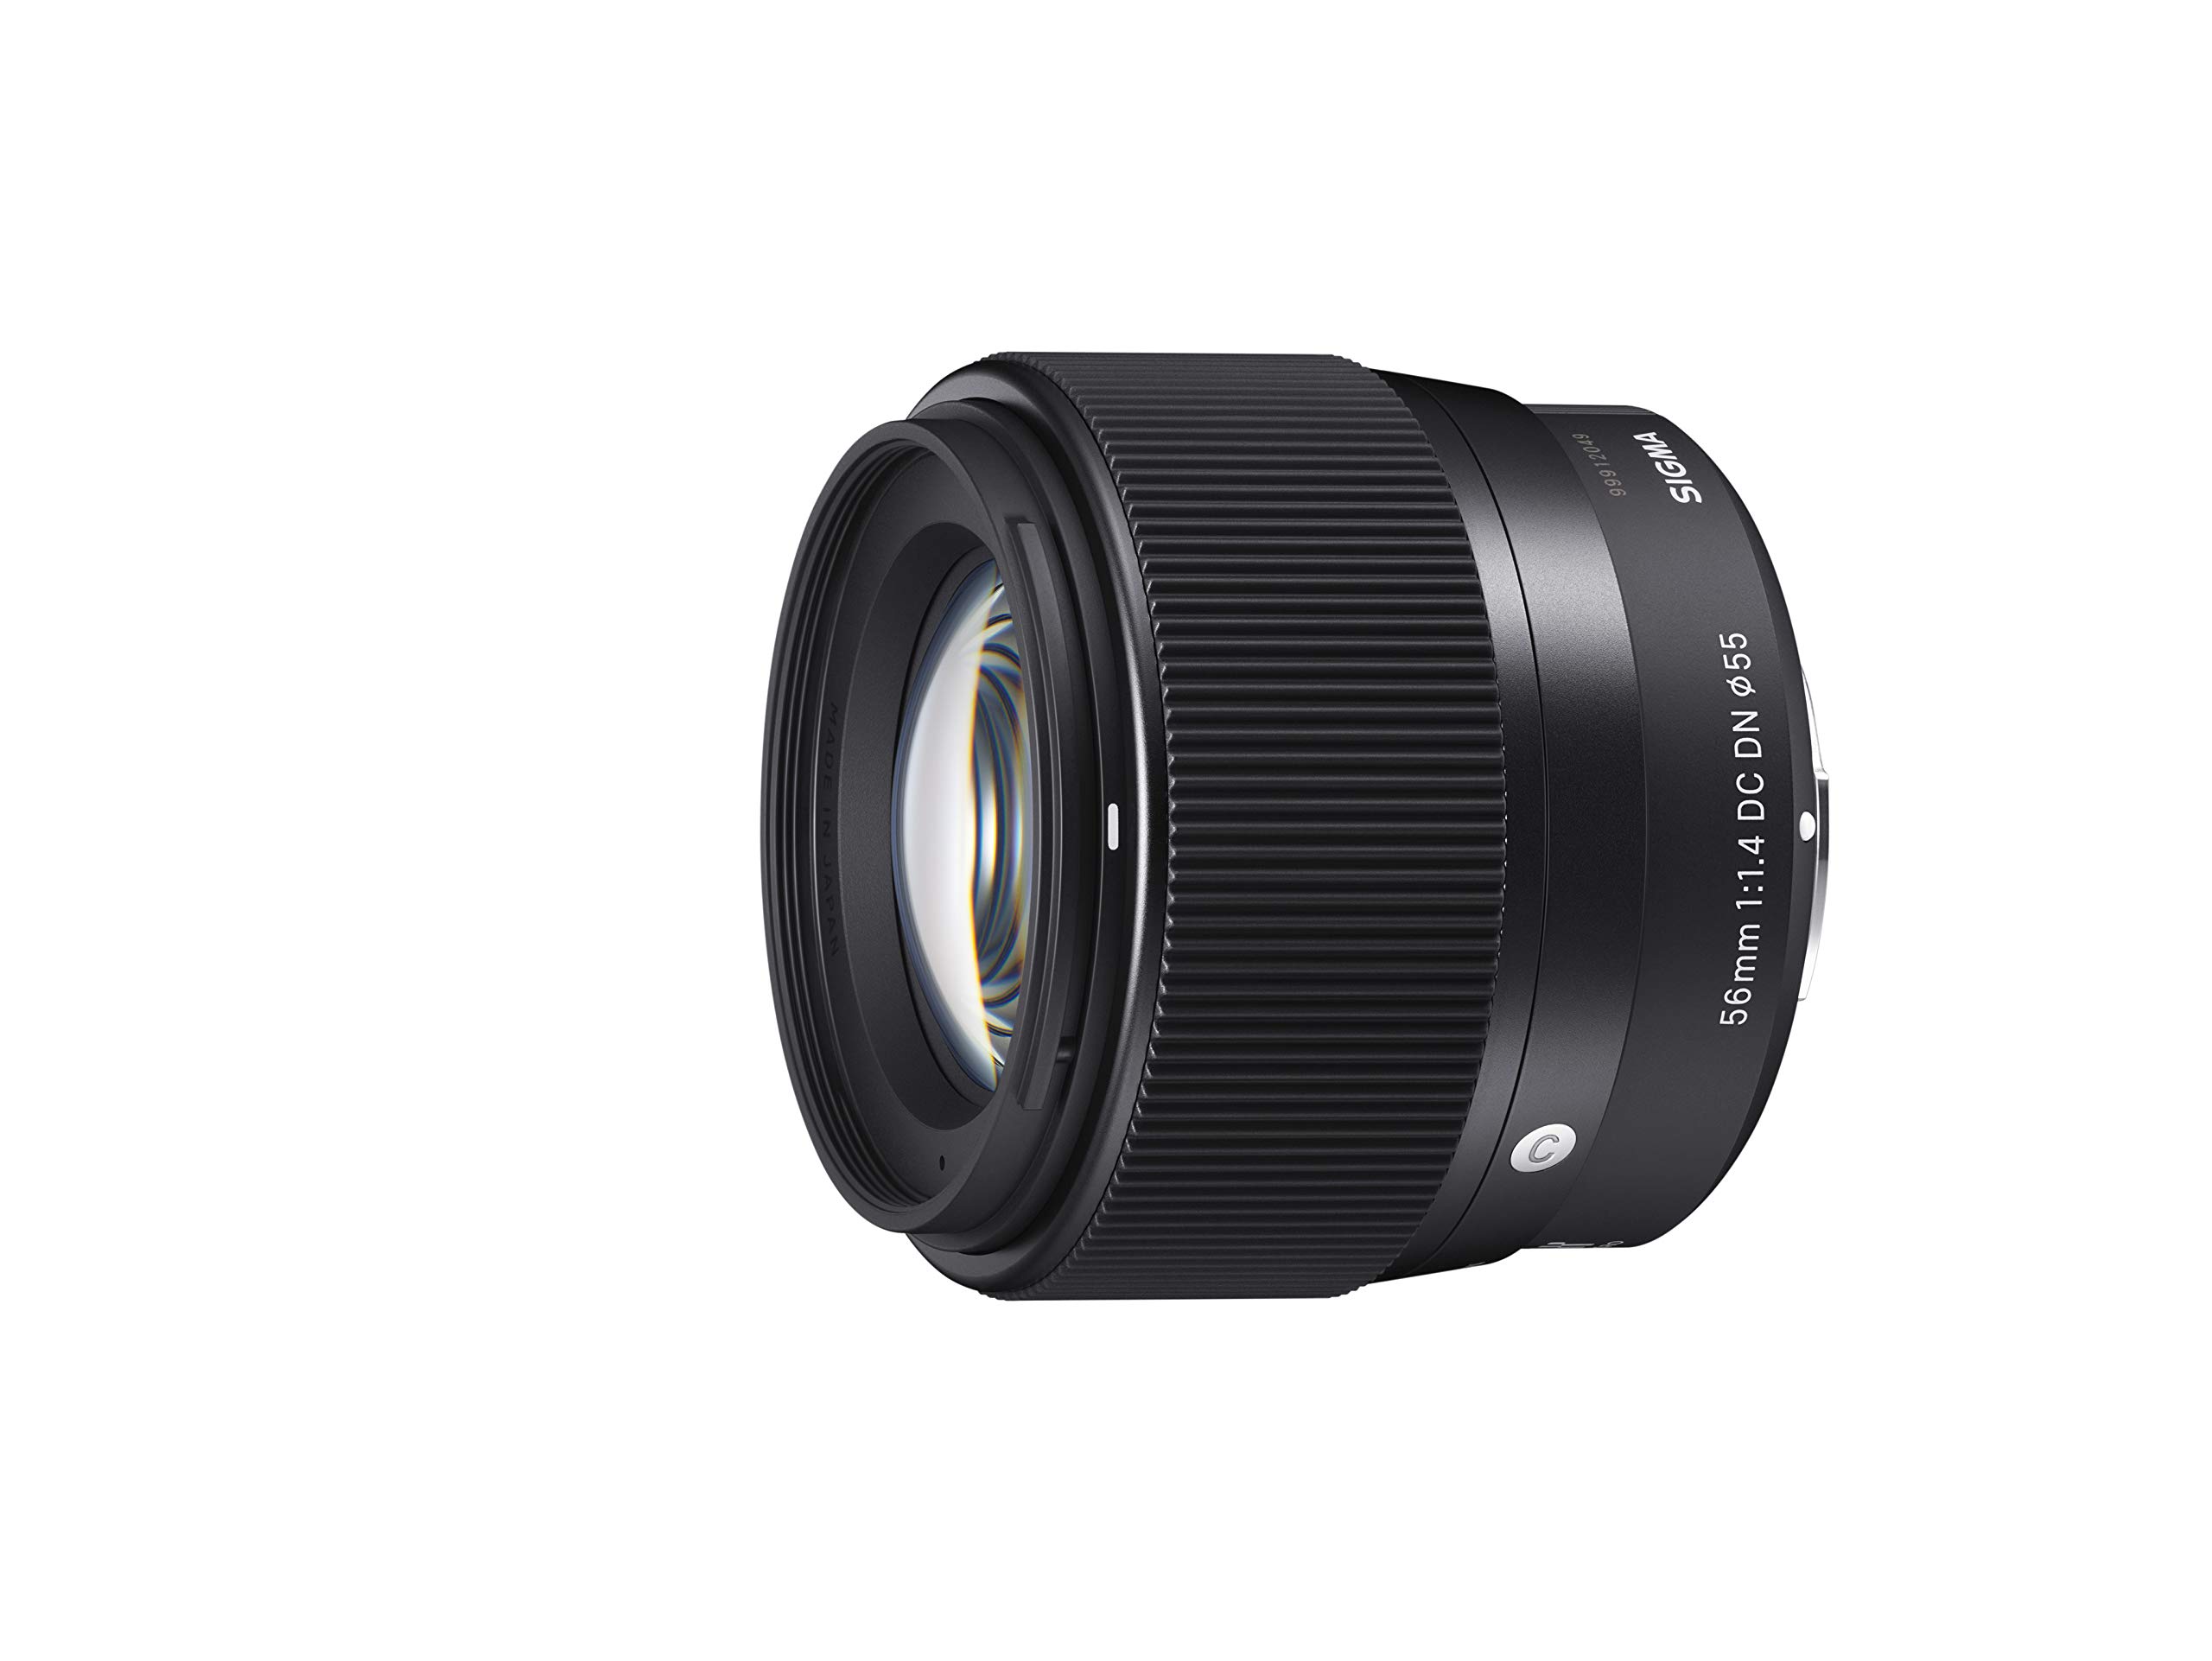 Sigma 56mm F1.4 DC DN for EF-M Mount (351971)